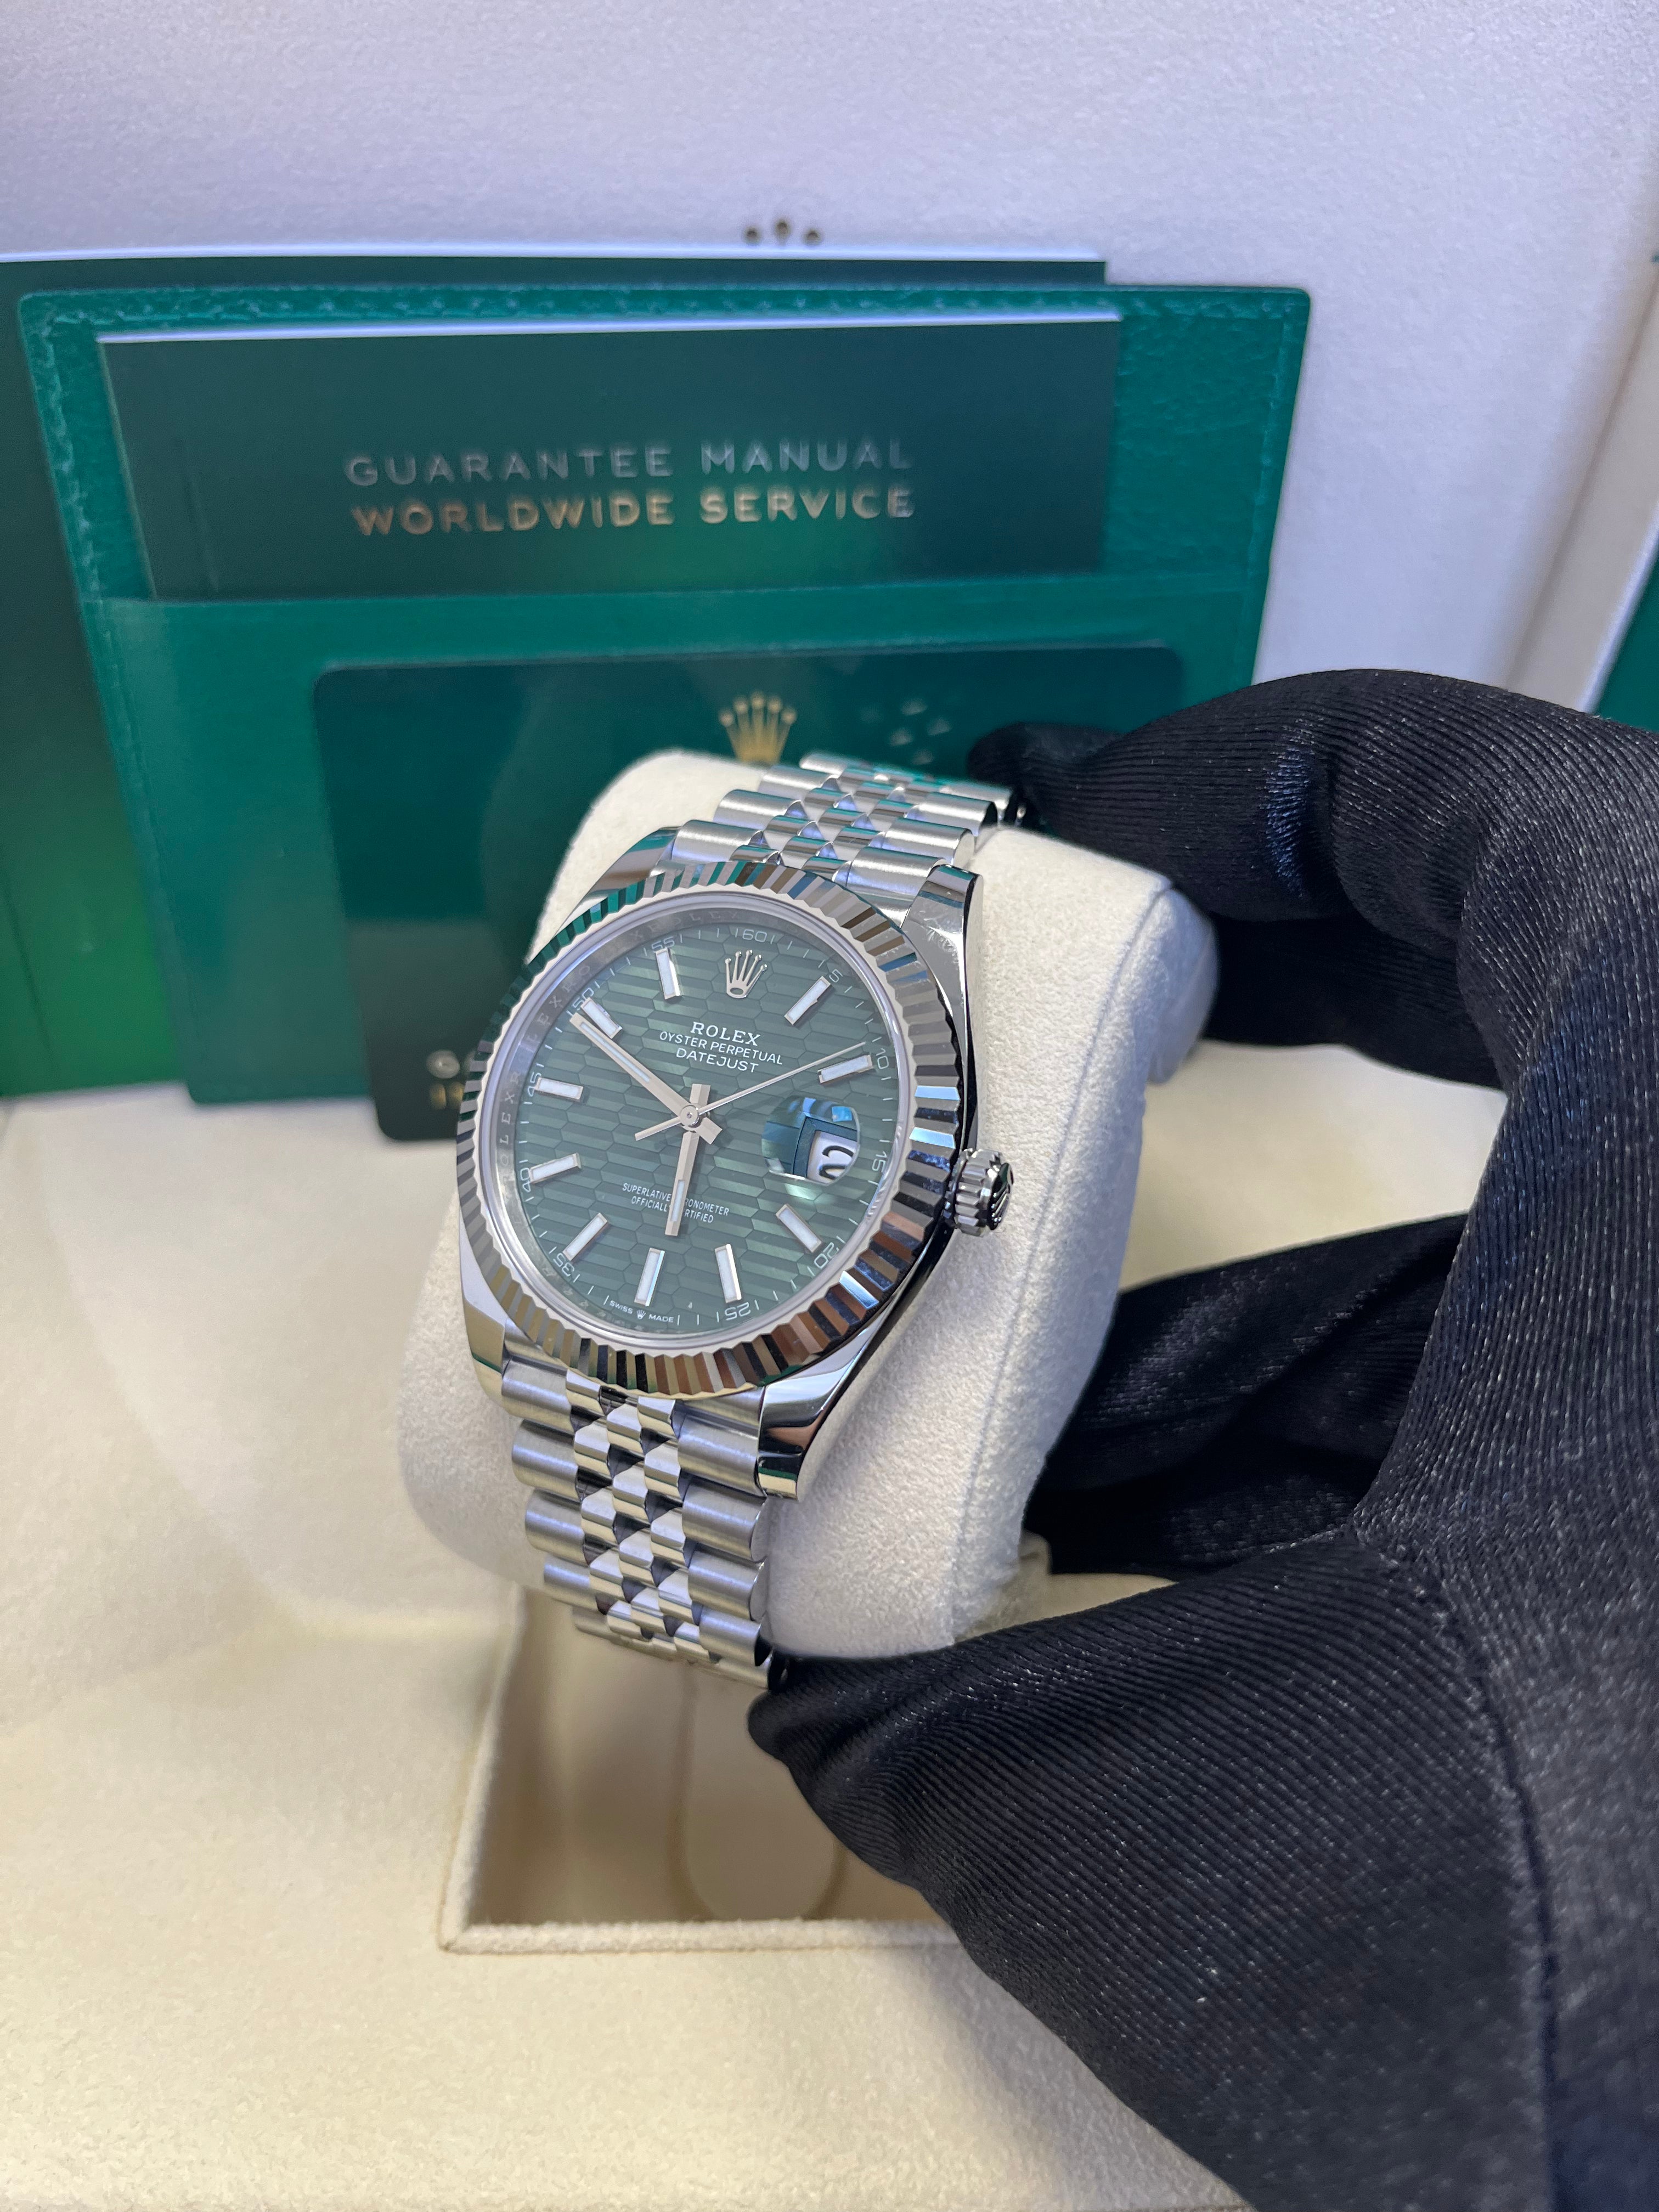 Rolex Datejust 41mm White Gold/Steel Mint Green Fluted Motif Index Fluted Bezel Jubilee Reference #126334